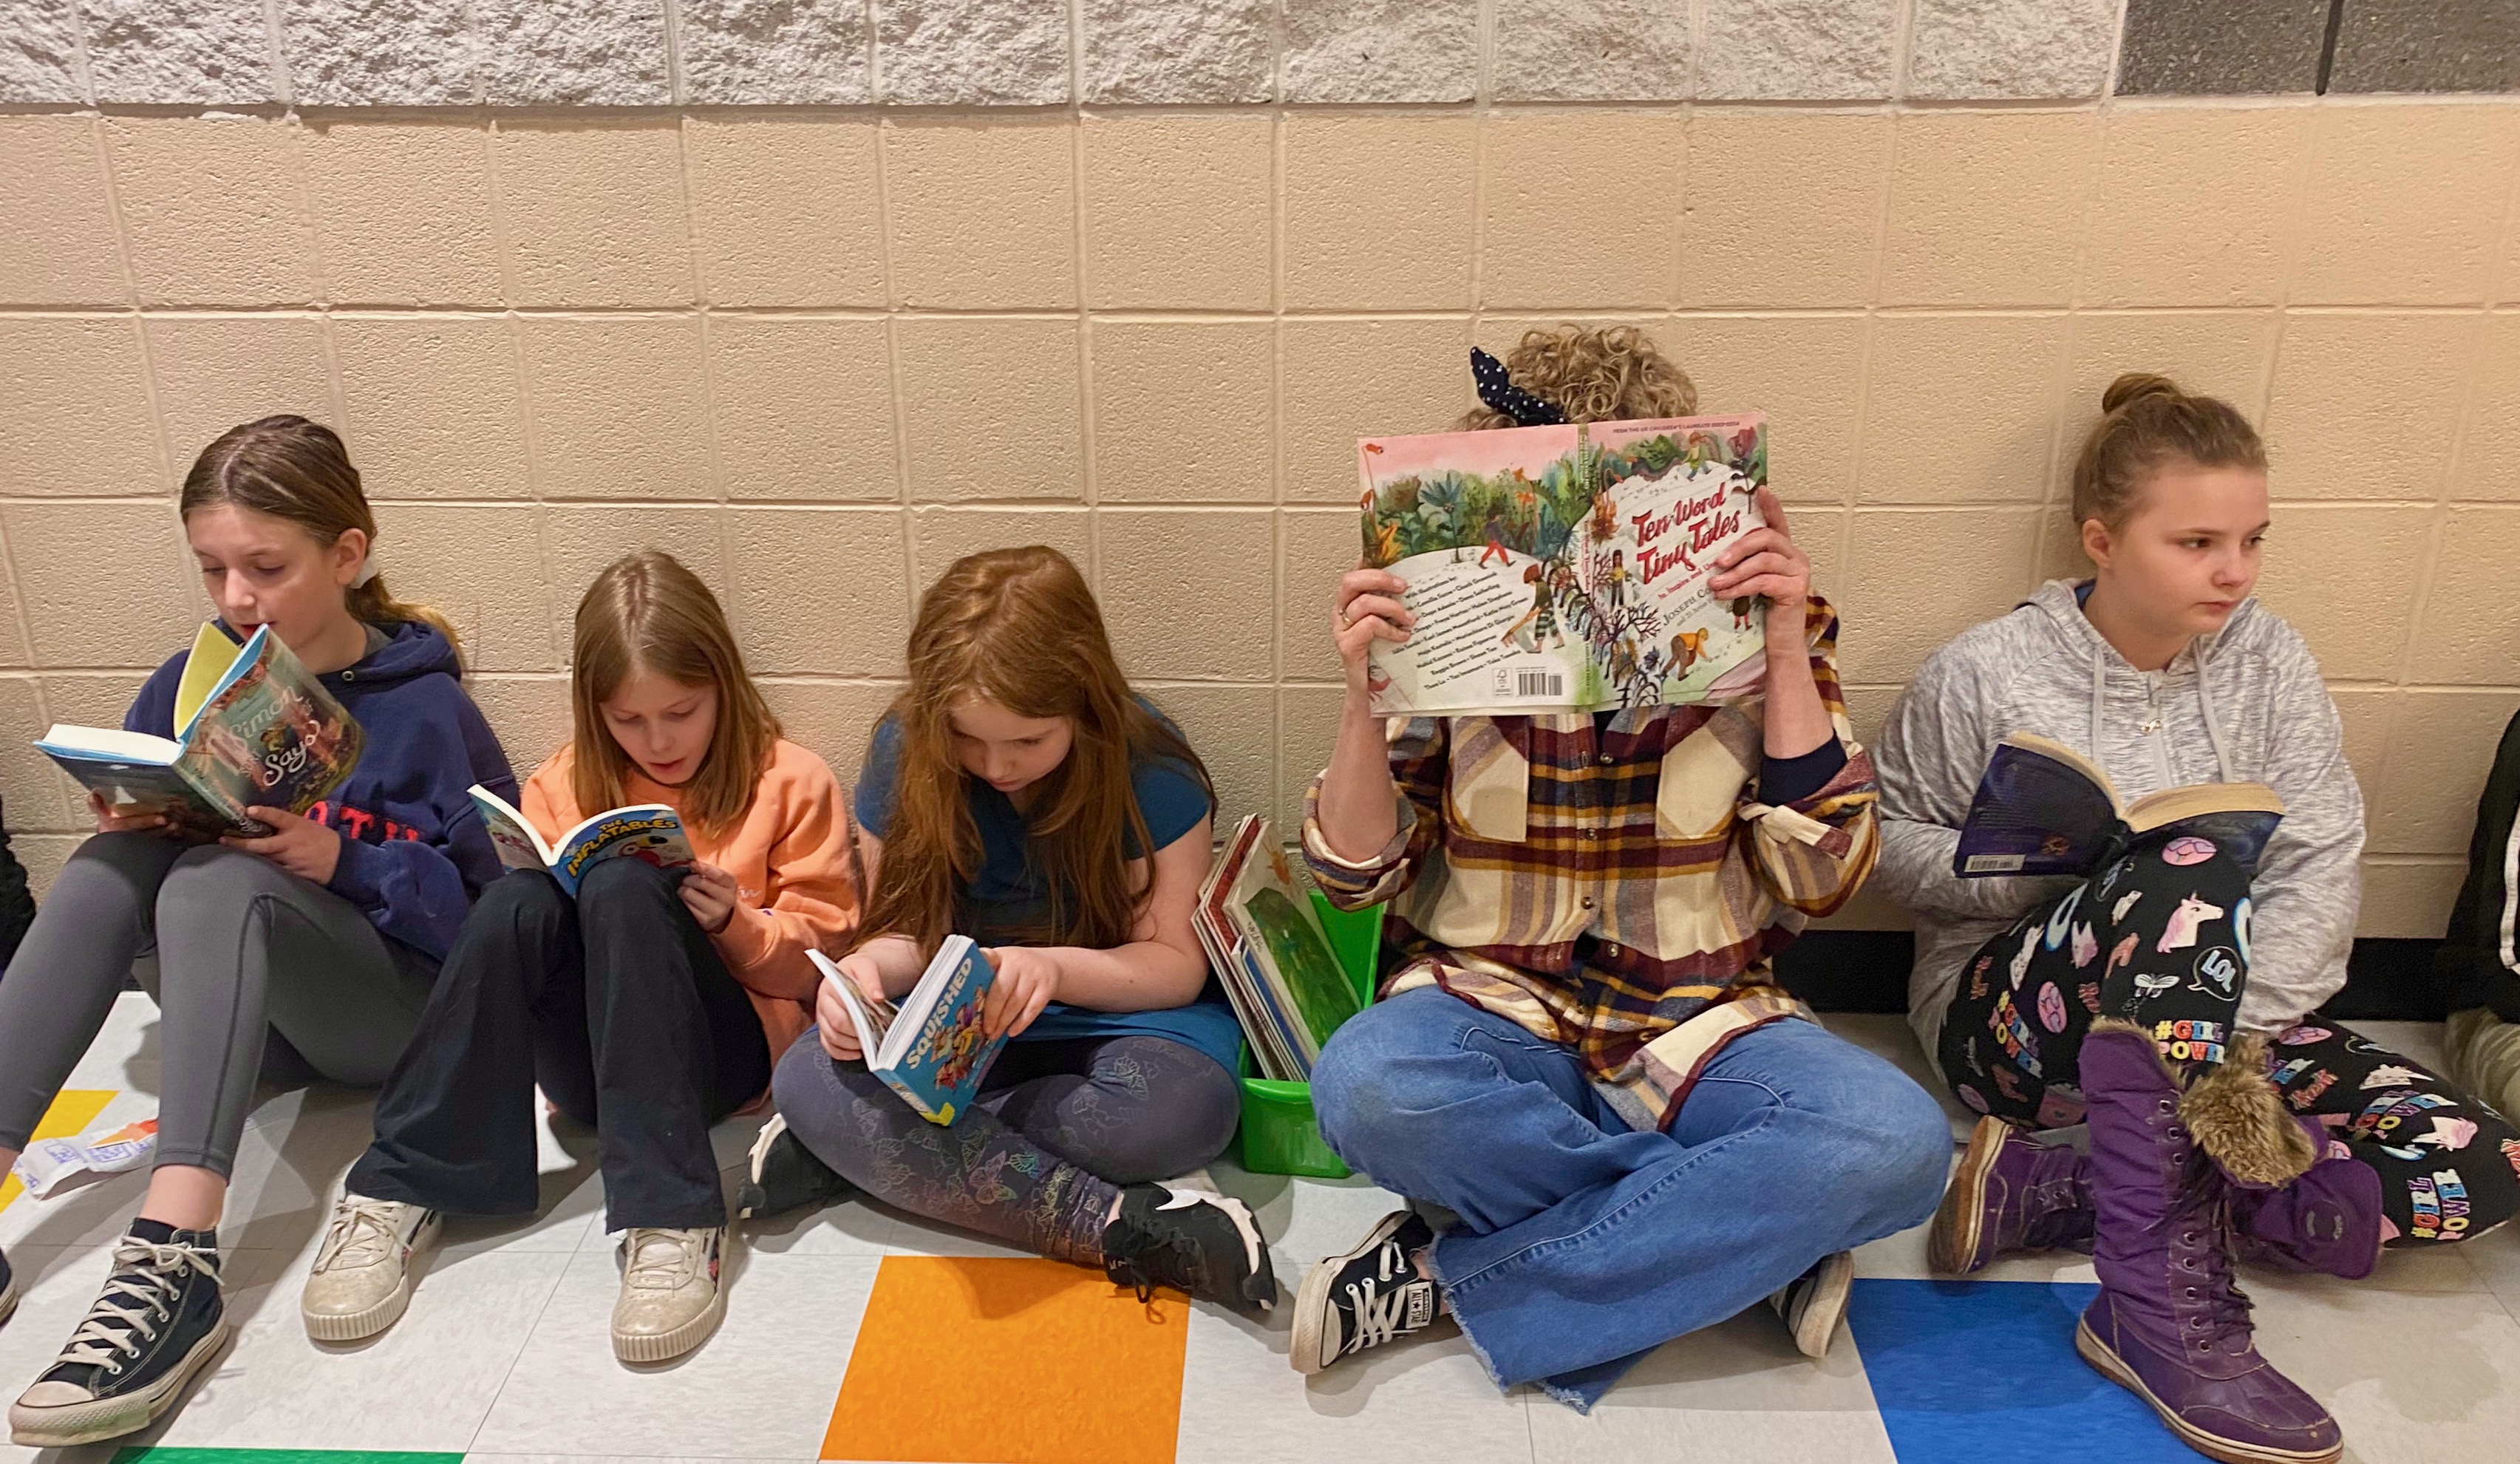 Students and a teacher sit on the floor in a classroom hallway while reading books